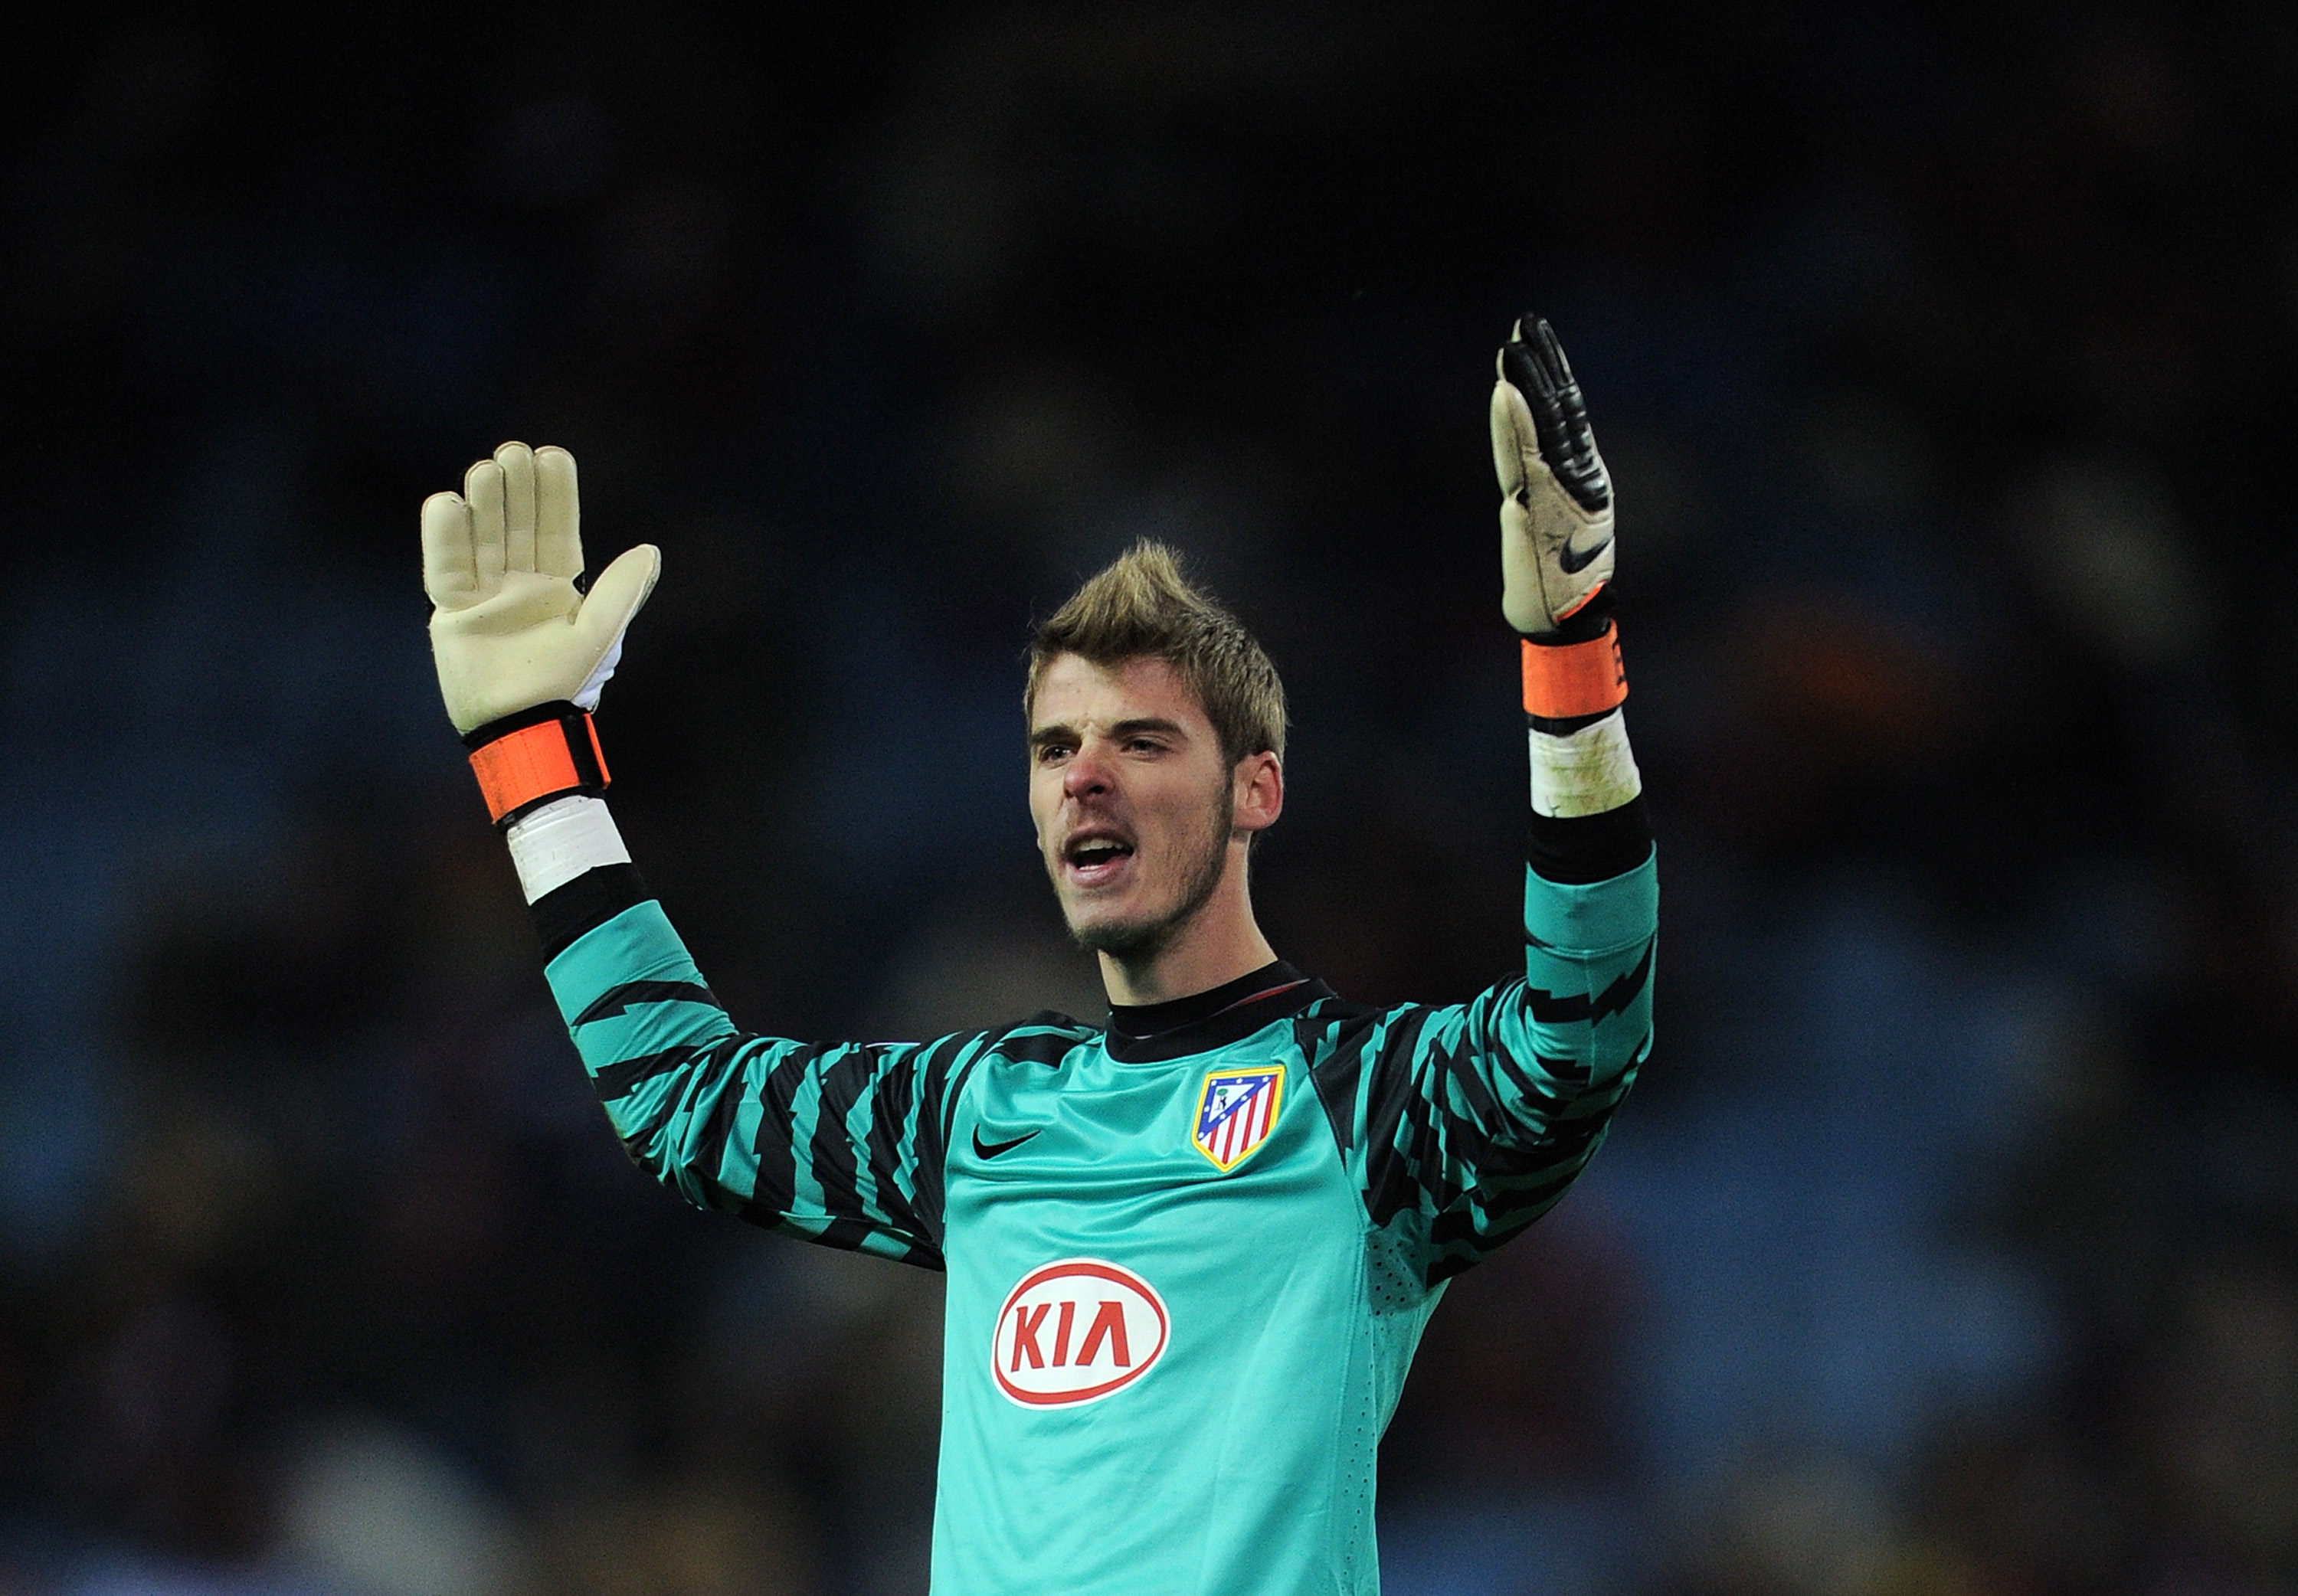 MADRID, SPAIN - DECEMBER 01:  Goalkeeper David de Gea of Atletico Madrid reacts during the Europea League match between Atletico Madrid and Aris Thessaloniki at the Vicente Calderon Stadium on December 1, 2010 in Madrid, Spain.  (Photo by Jasper Juinen/Ge